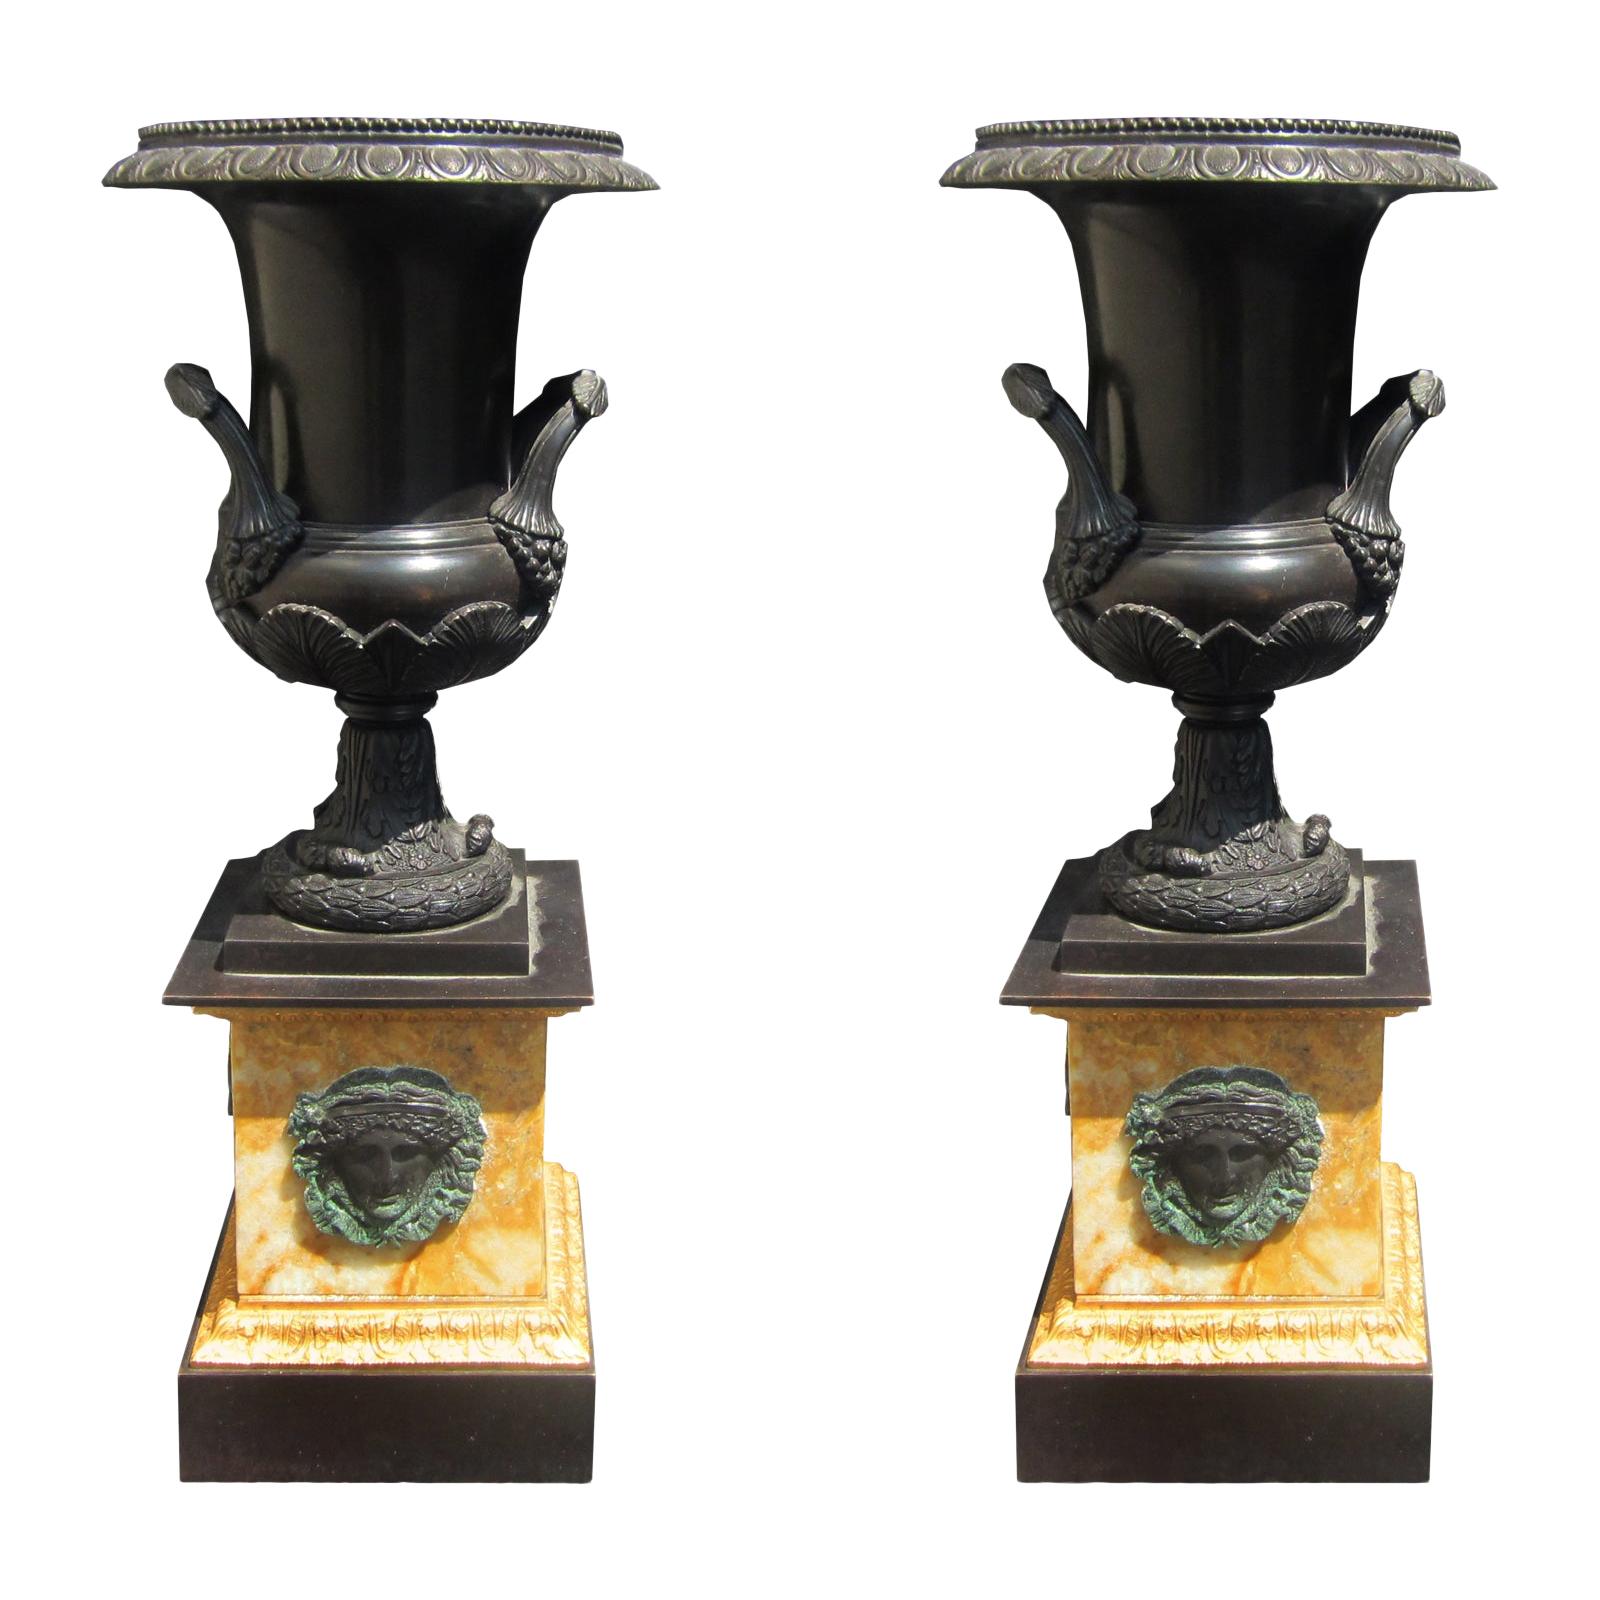 Pair of Impressive 19th Century French Empire Bronze Urns on Sienna Marble Bases